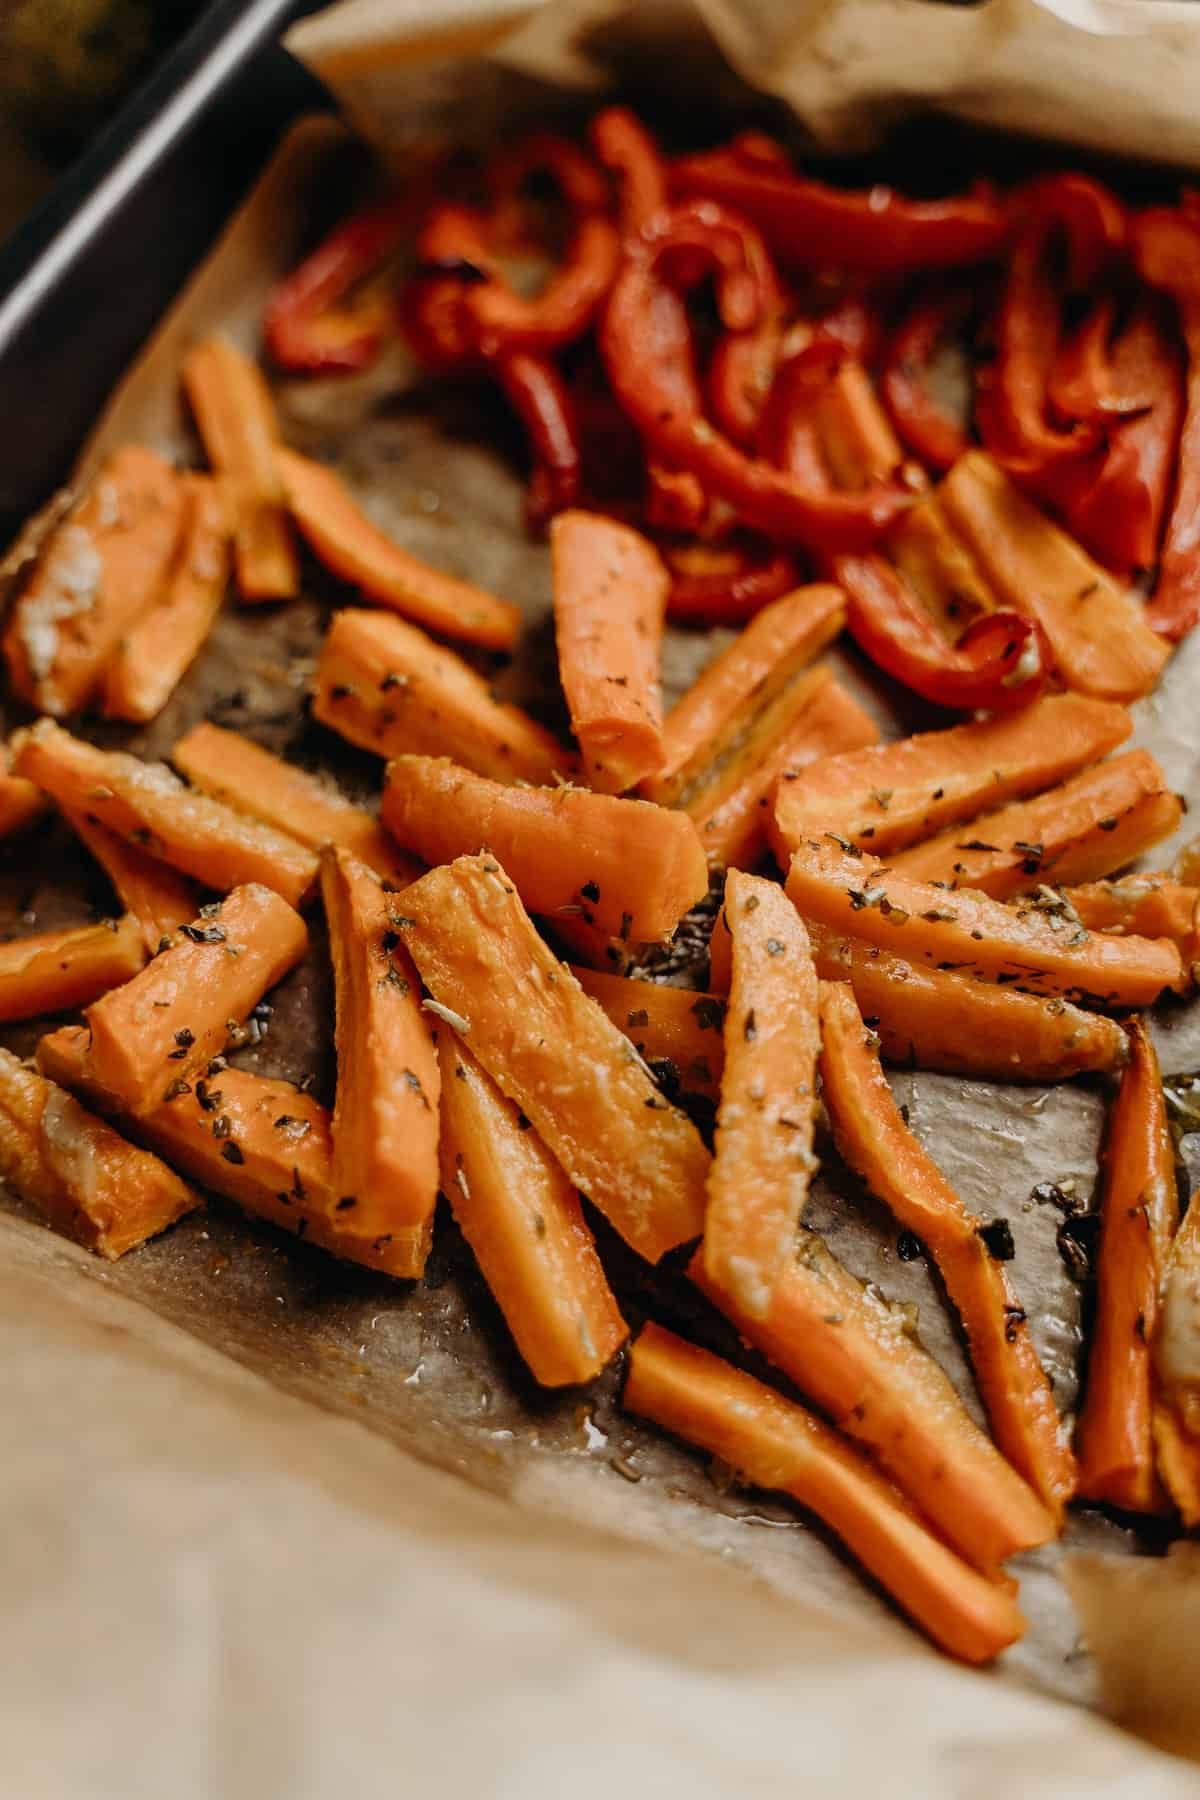 Roasted carrots with herbs and spices on a baking tray